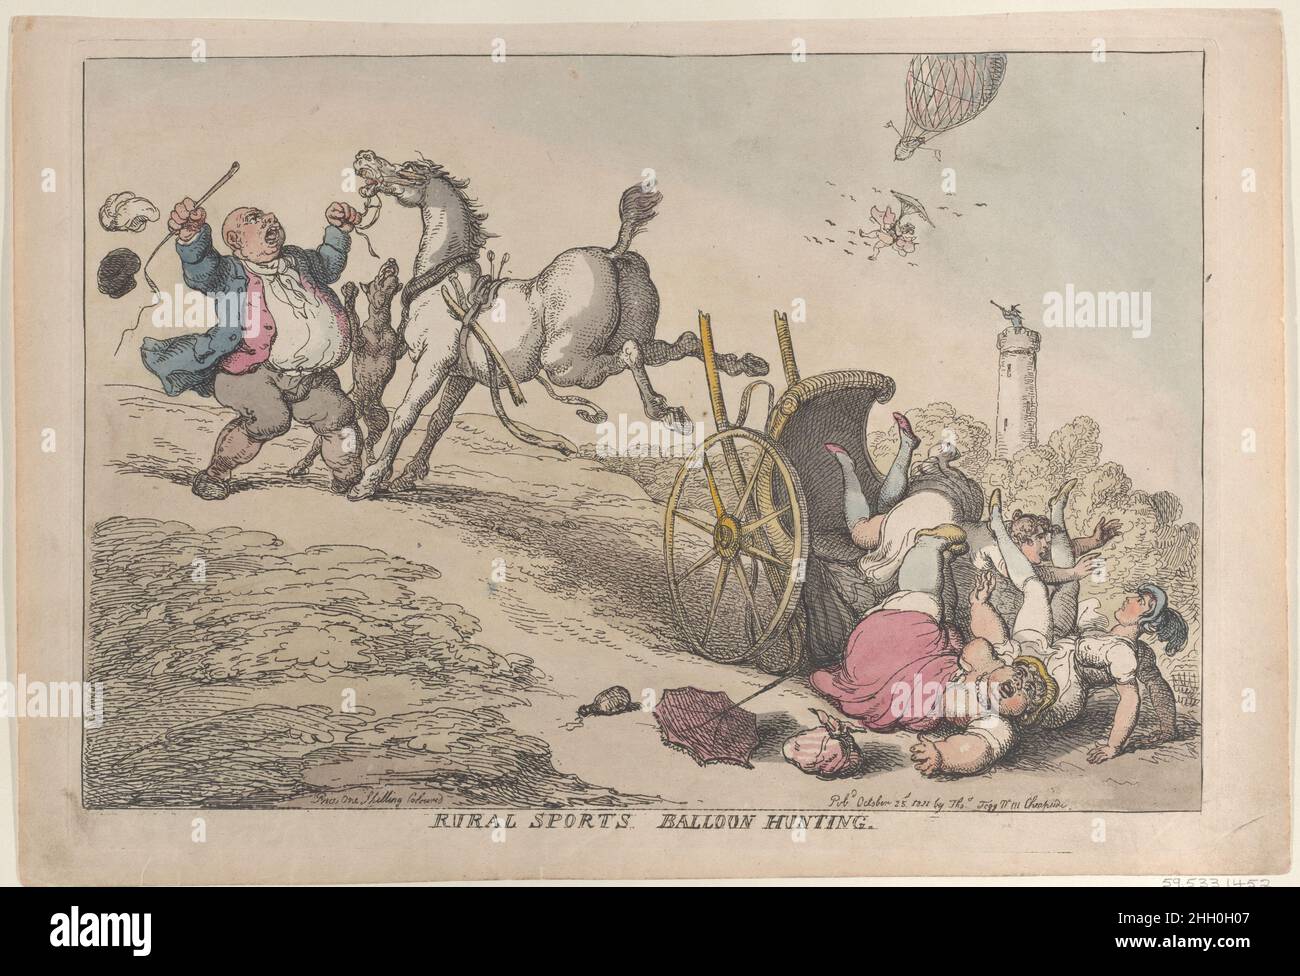 Rural Sports: Balloon Hunting October 25, 1811 Thomas Rowlandson Three women fall out of a cart as it goes up a hill. A man at left tries to hold the bridle of the kicking horse and loses his hat and wig.. Rural Sports: Balloon Hunting. Thomas Rowlandson (British, London 1757–1827 London). October 25, 1811. Hand-colored etching. Thomas Tegg (British, 1776–1846). Prints Stock Photo